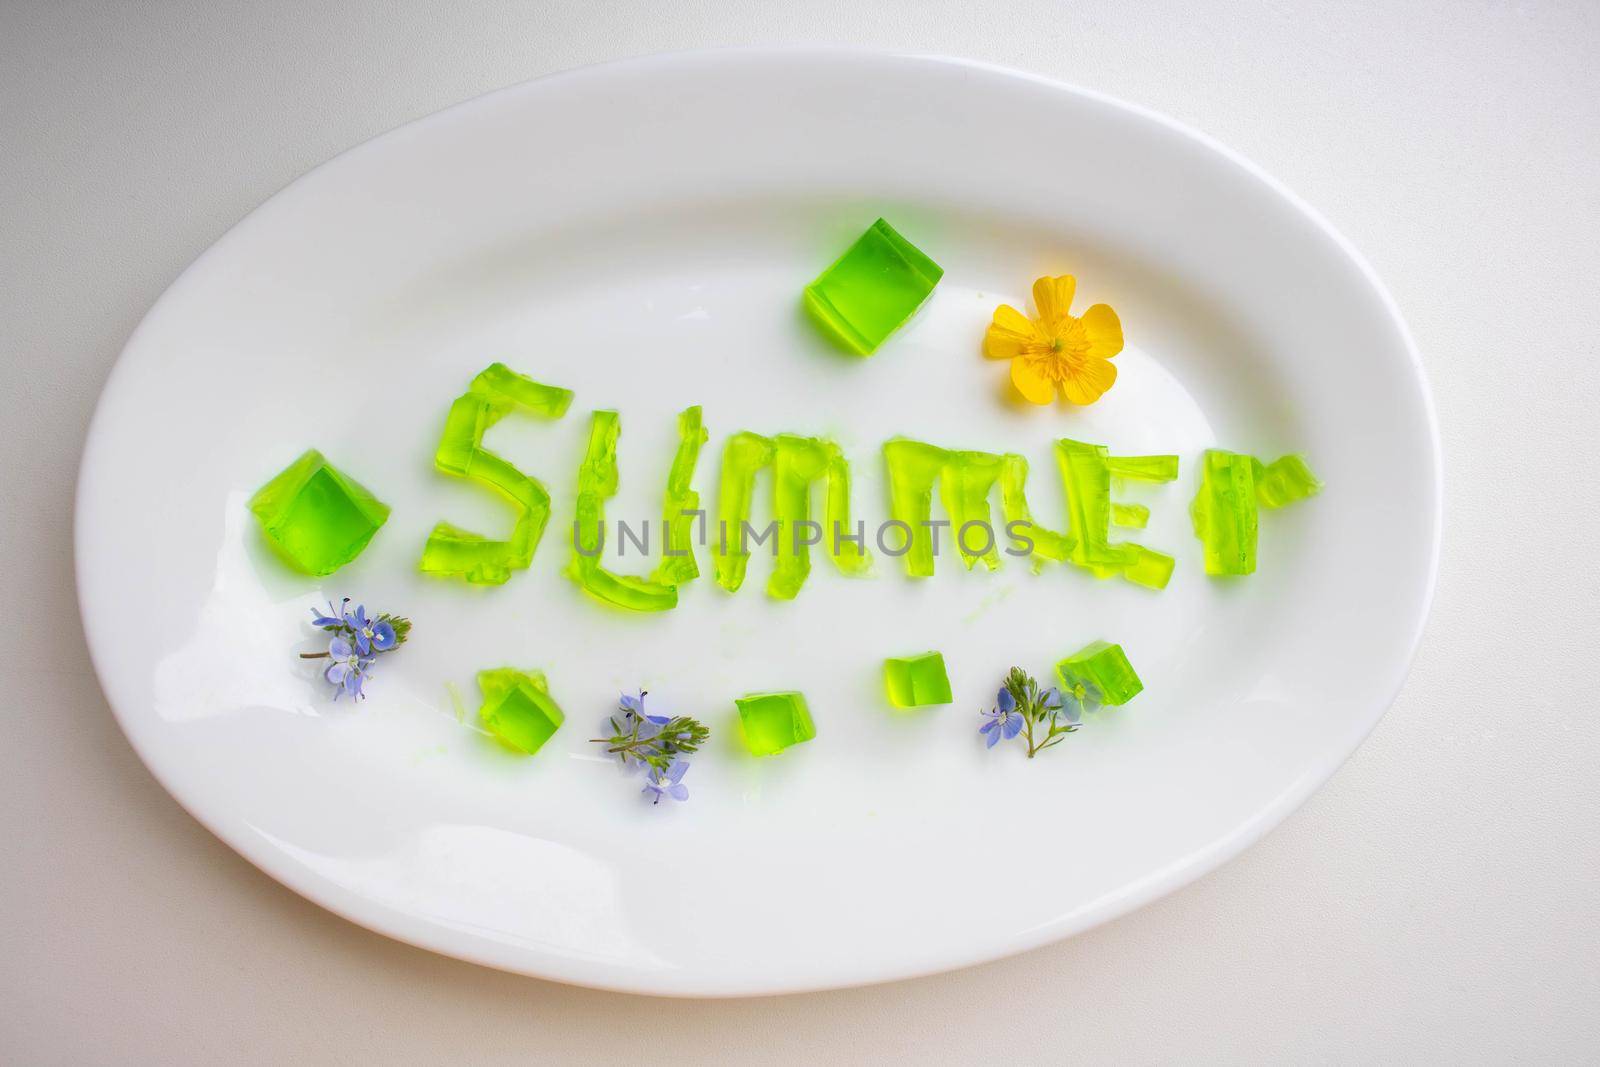 The word summer is made of green jelly cubes on a white plate.